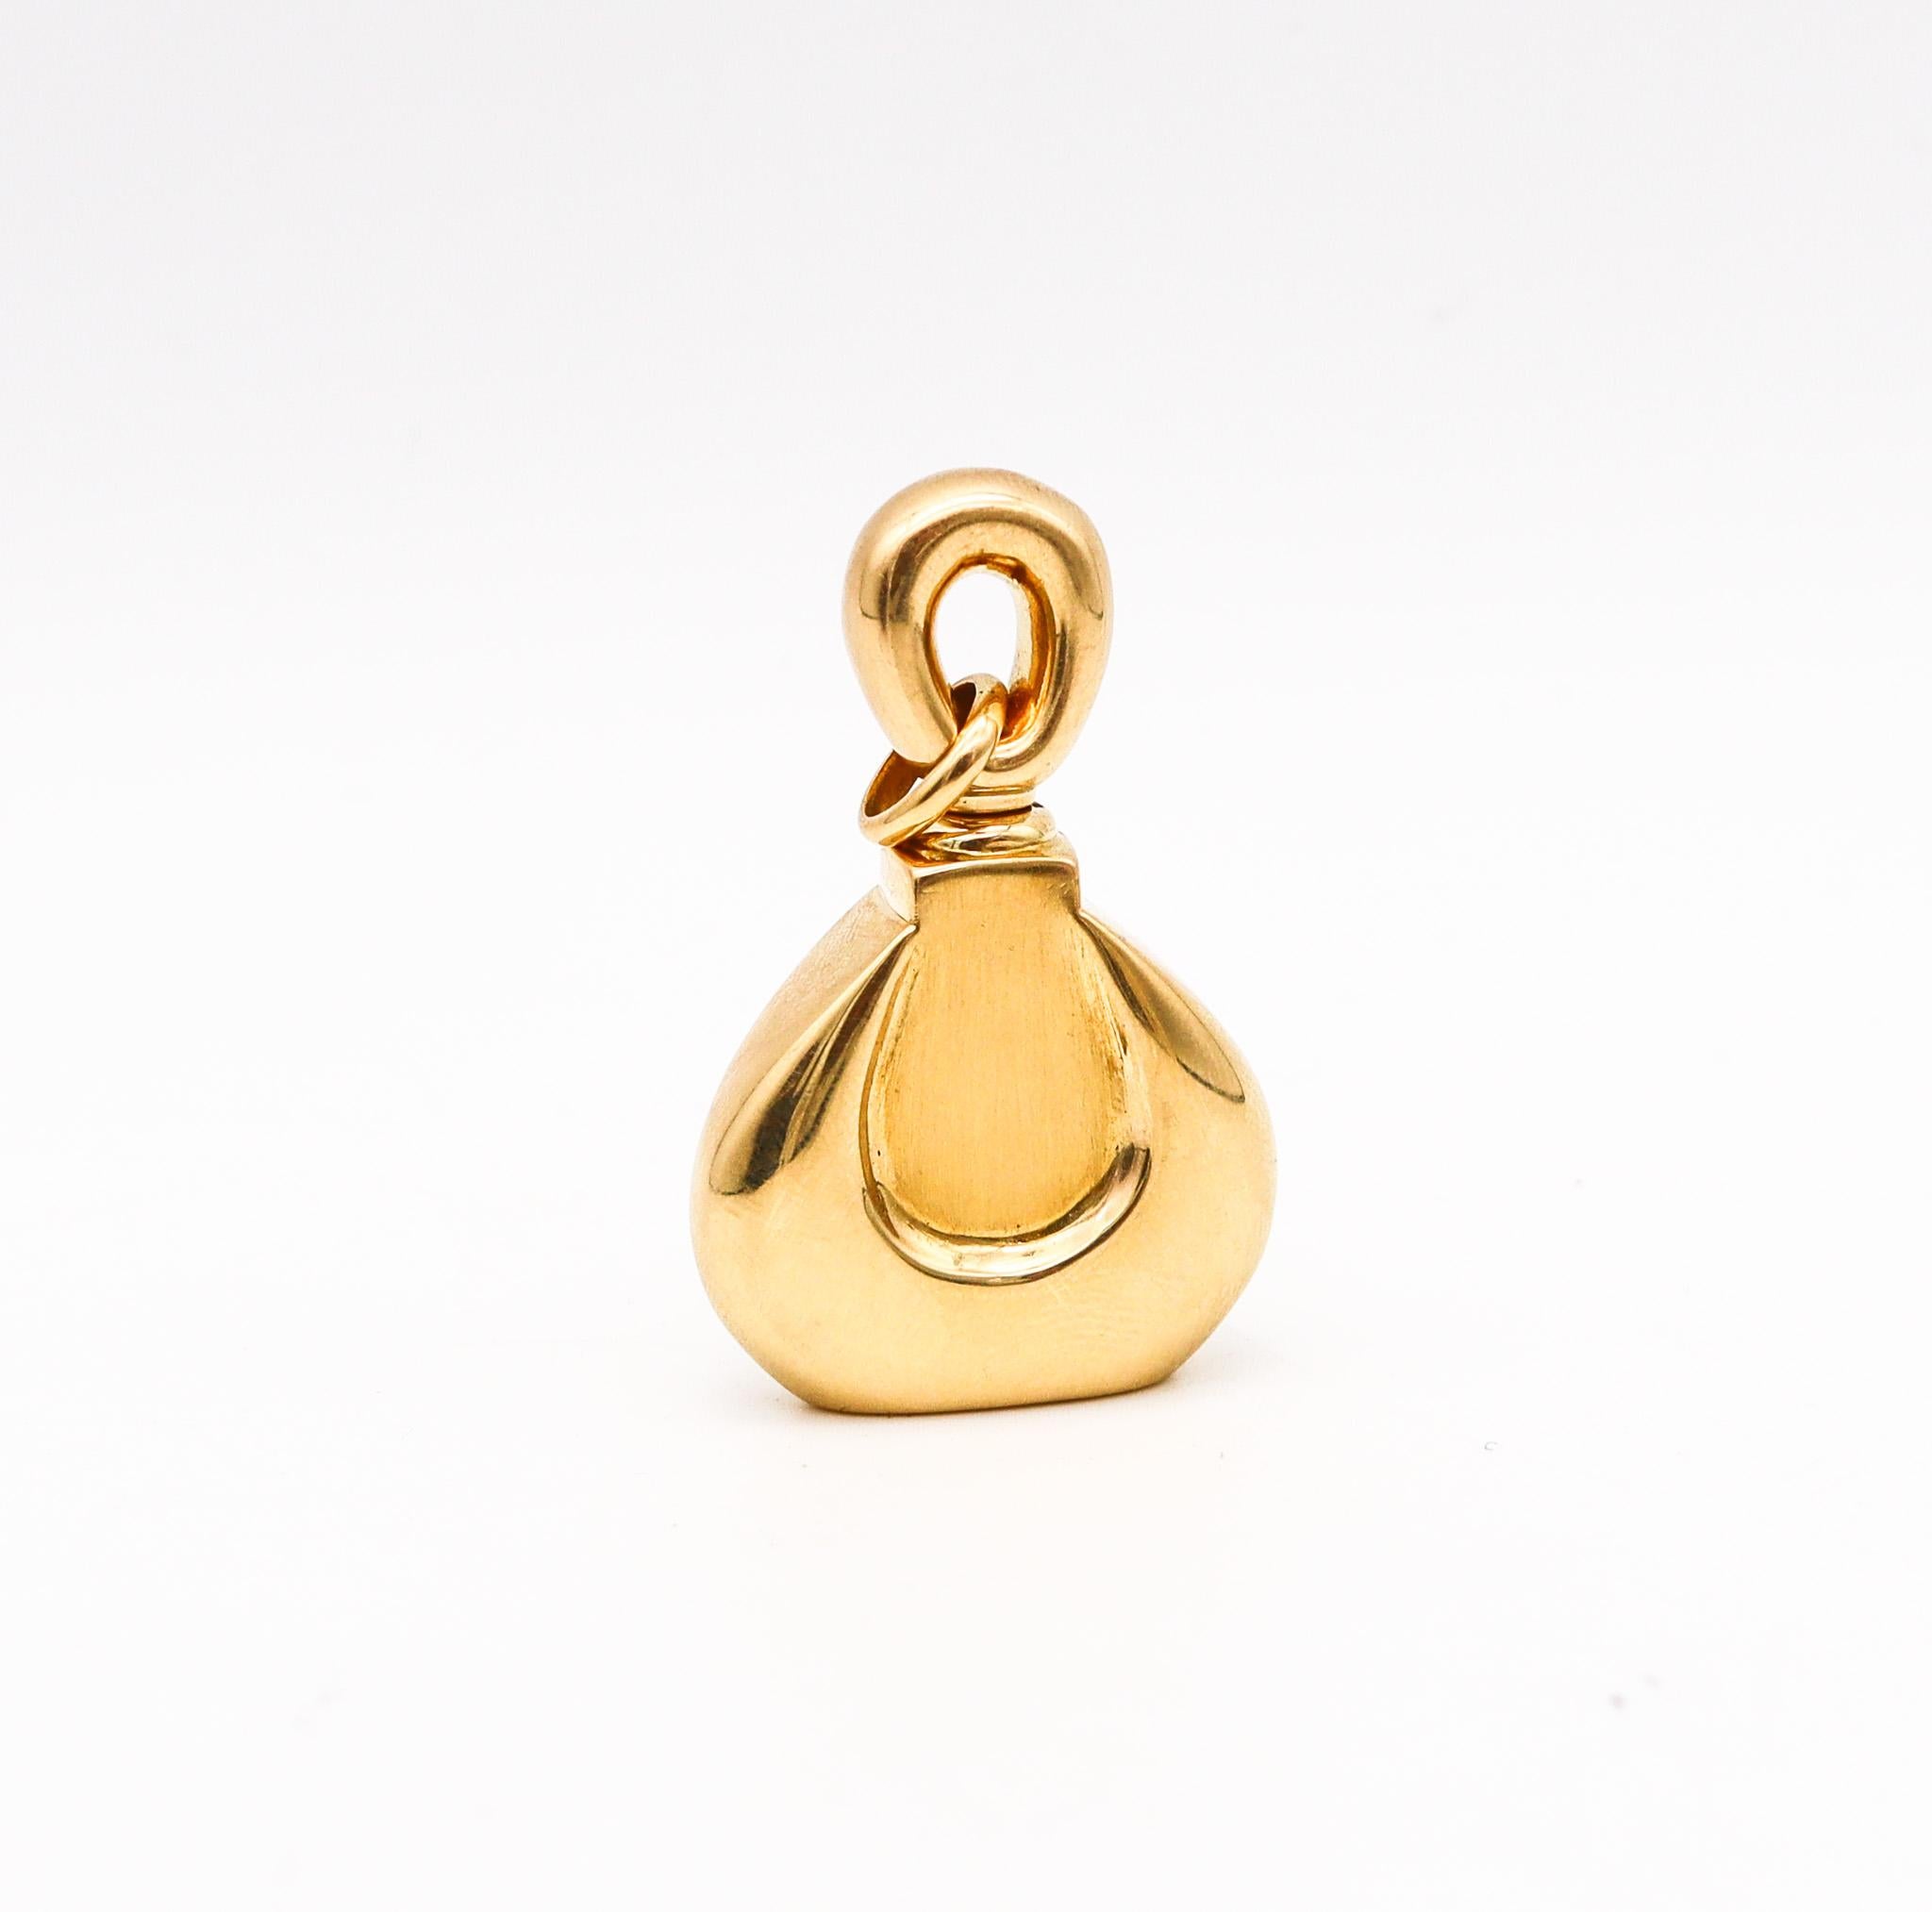 A perfume bottle pendant designed by Van Cleef & Arpels.

Very rare perfume bottle pendant, created in Paris France by the jewelry house of Van Cleef & Arpels, back in the 1976. This piece is very unusual and never see in the collector's after